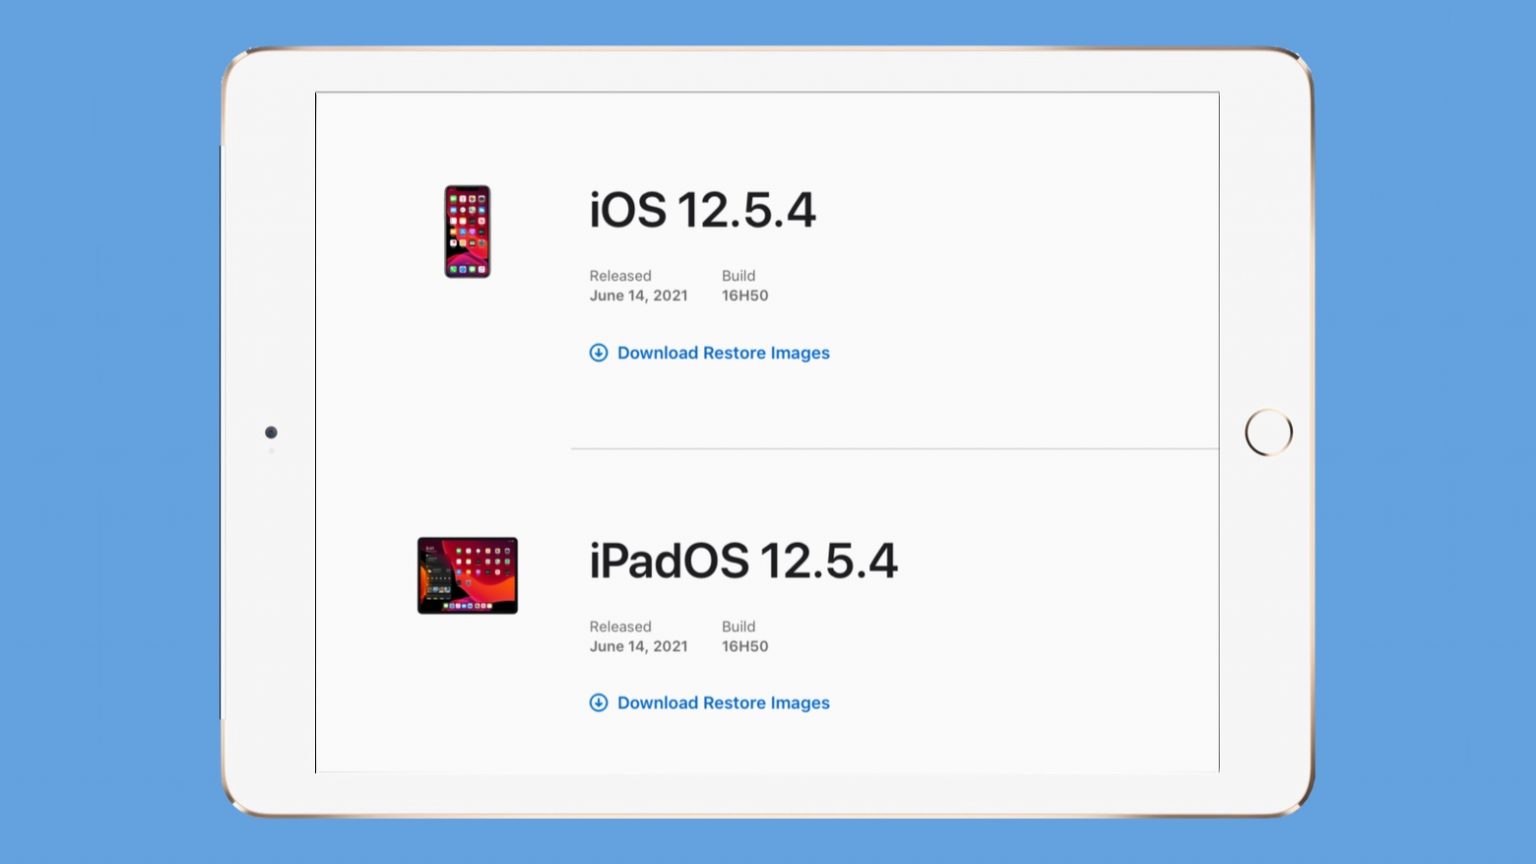 iOS 12.5.4 and iPadOS 12.5.4 close security holes for older iPhones, iPads